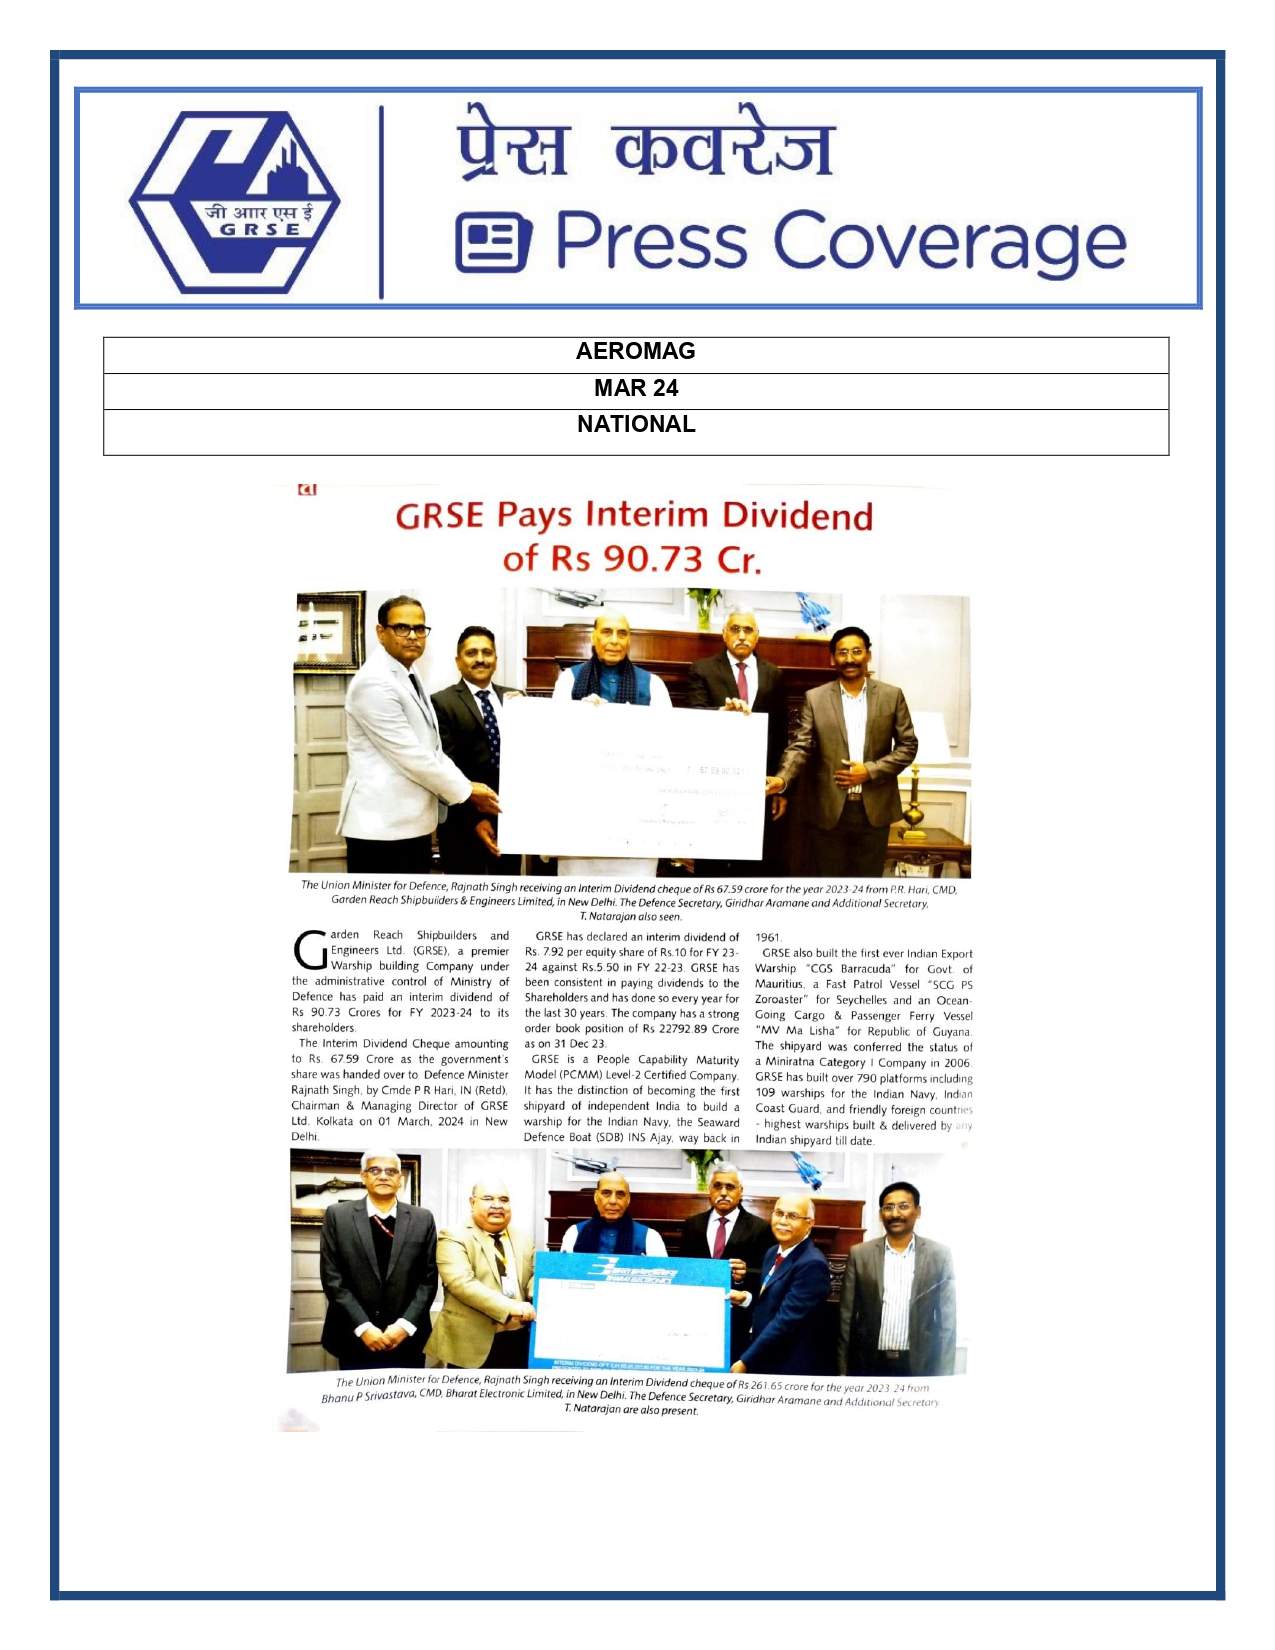 Press Coverage : Aeromag, Mar 24 : GRSE Pays Interim Dividend of Rs 90.73 Cr